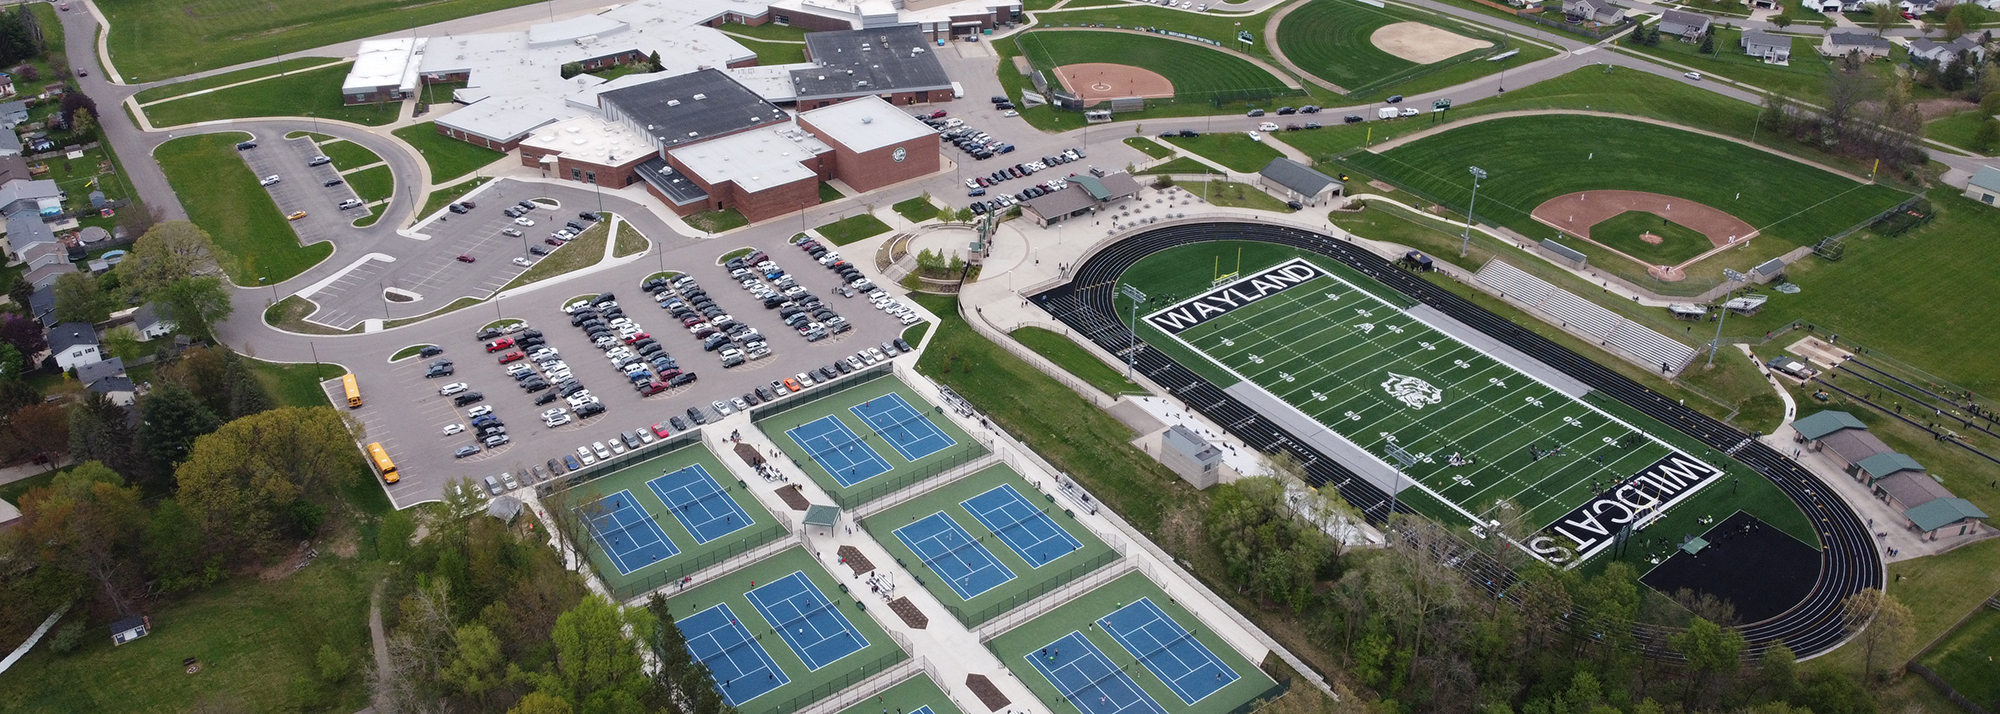 Ariel view of high school and stadium